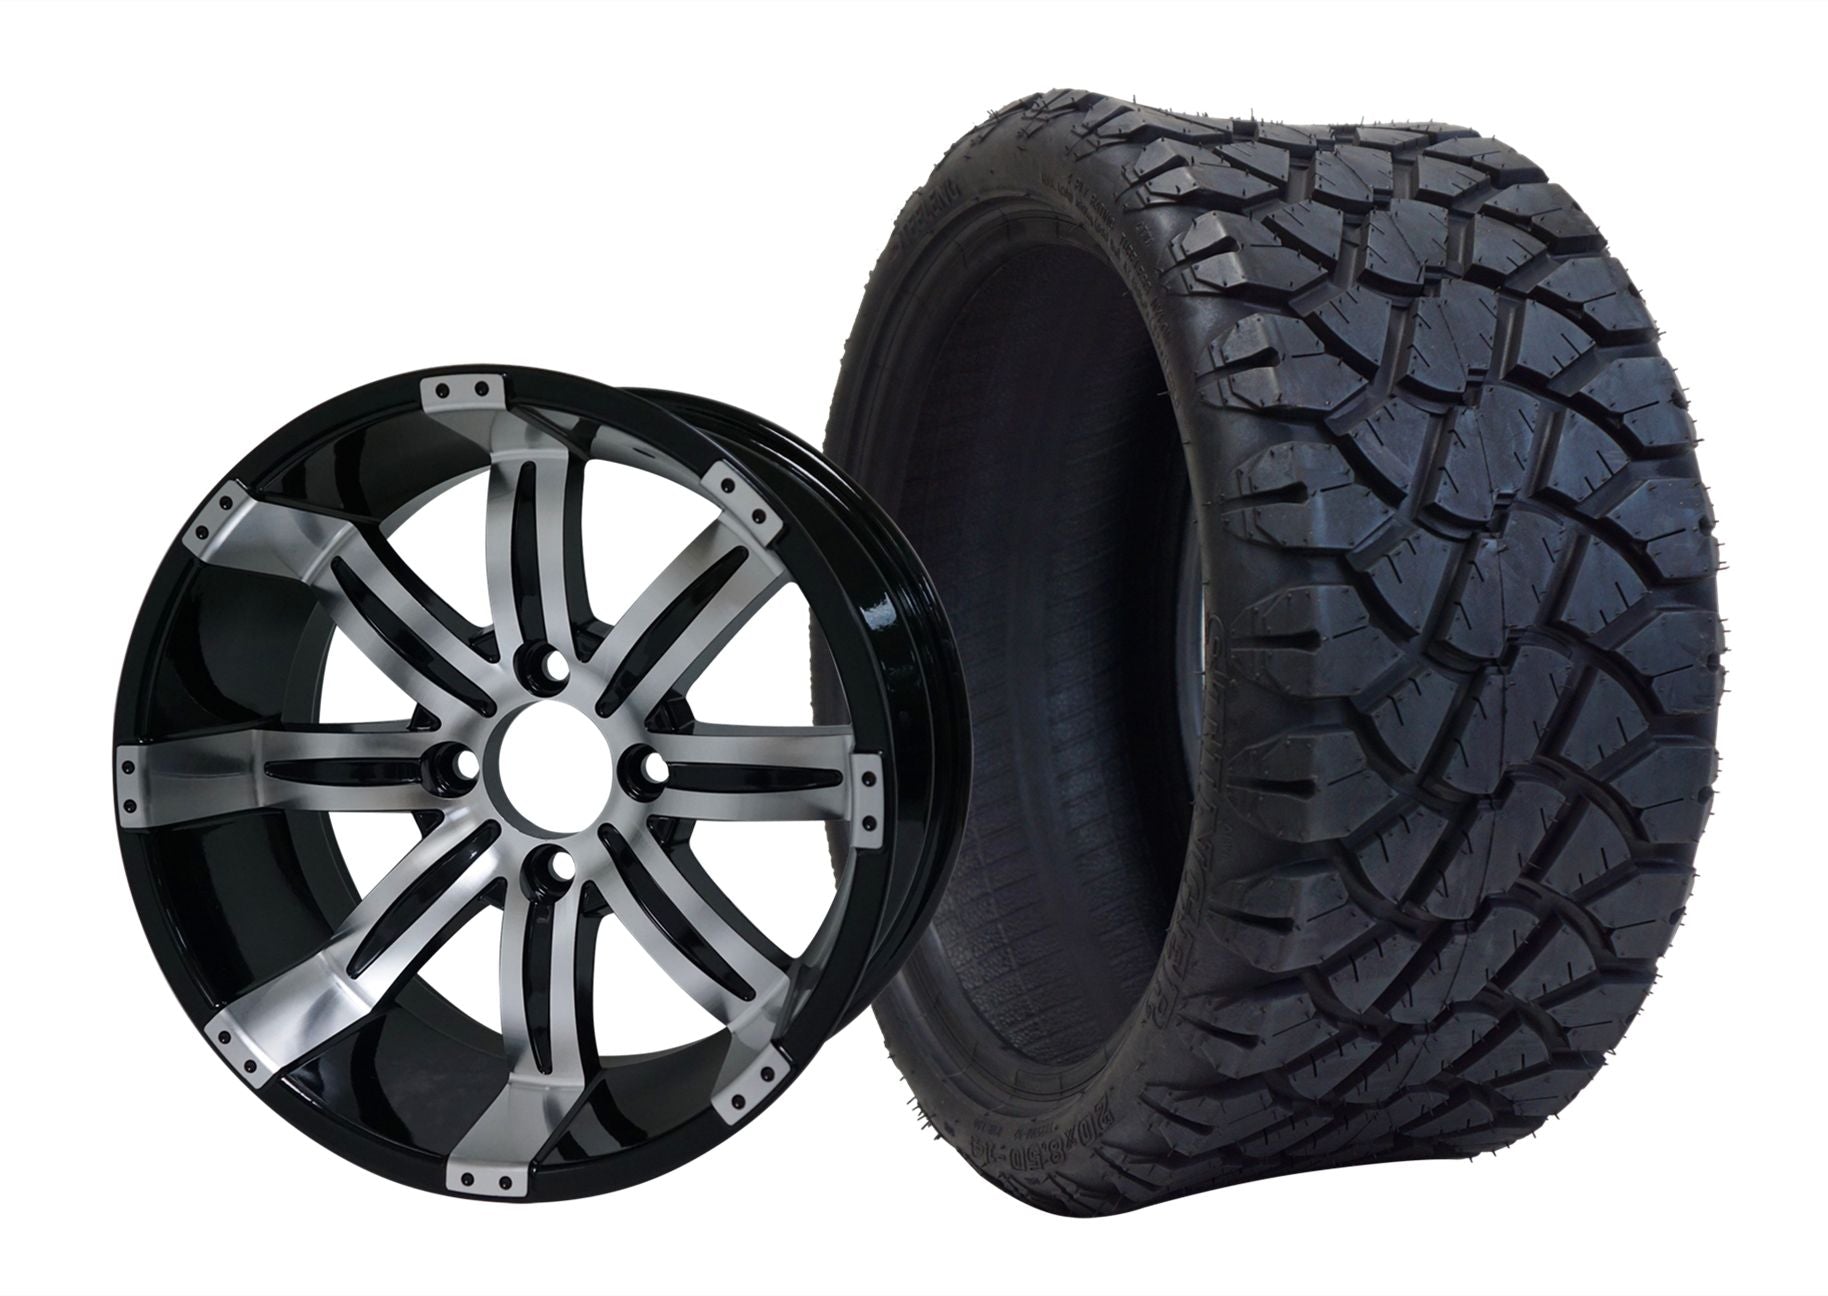 SGC 14" x 7" Tempest Machined/Black Wheel - Aluminum Alloy STEELENG 20"x8.5"-14" STINGER AT Tire DOT approved WH1406-TR1402